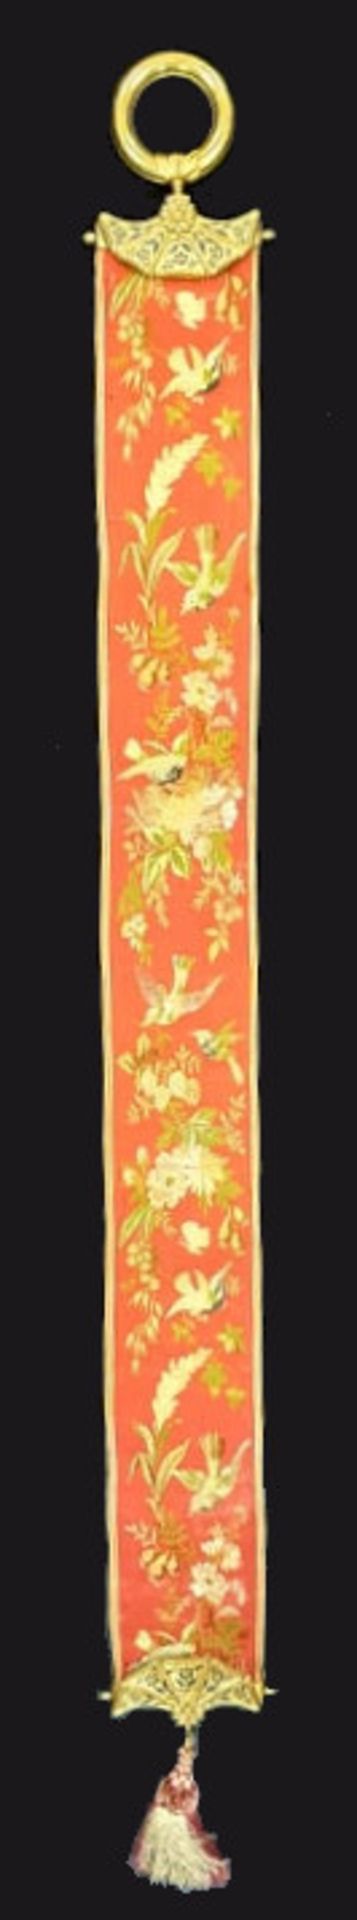 19th Century Bell Pull | Japonisme | Silks - Image 2 of 5